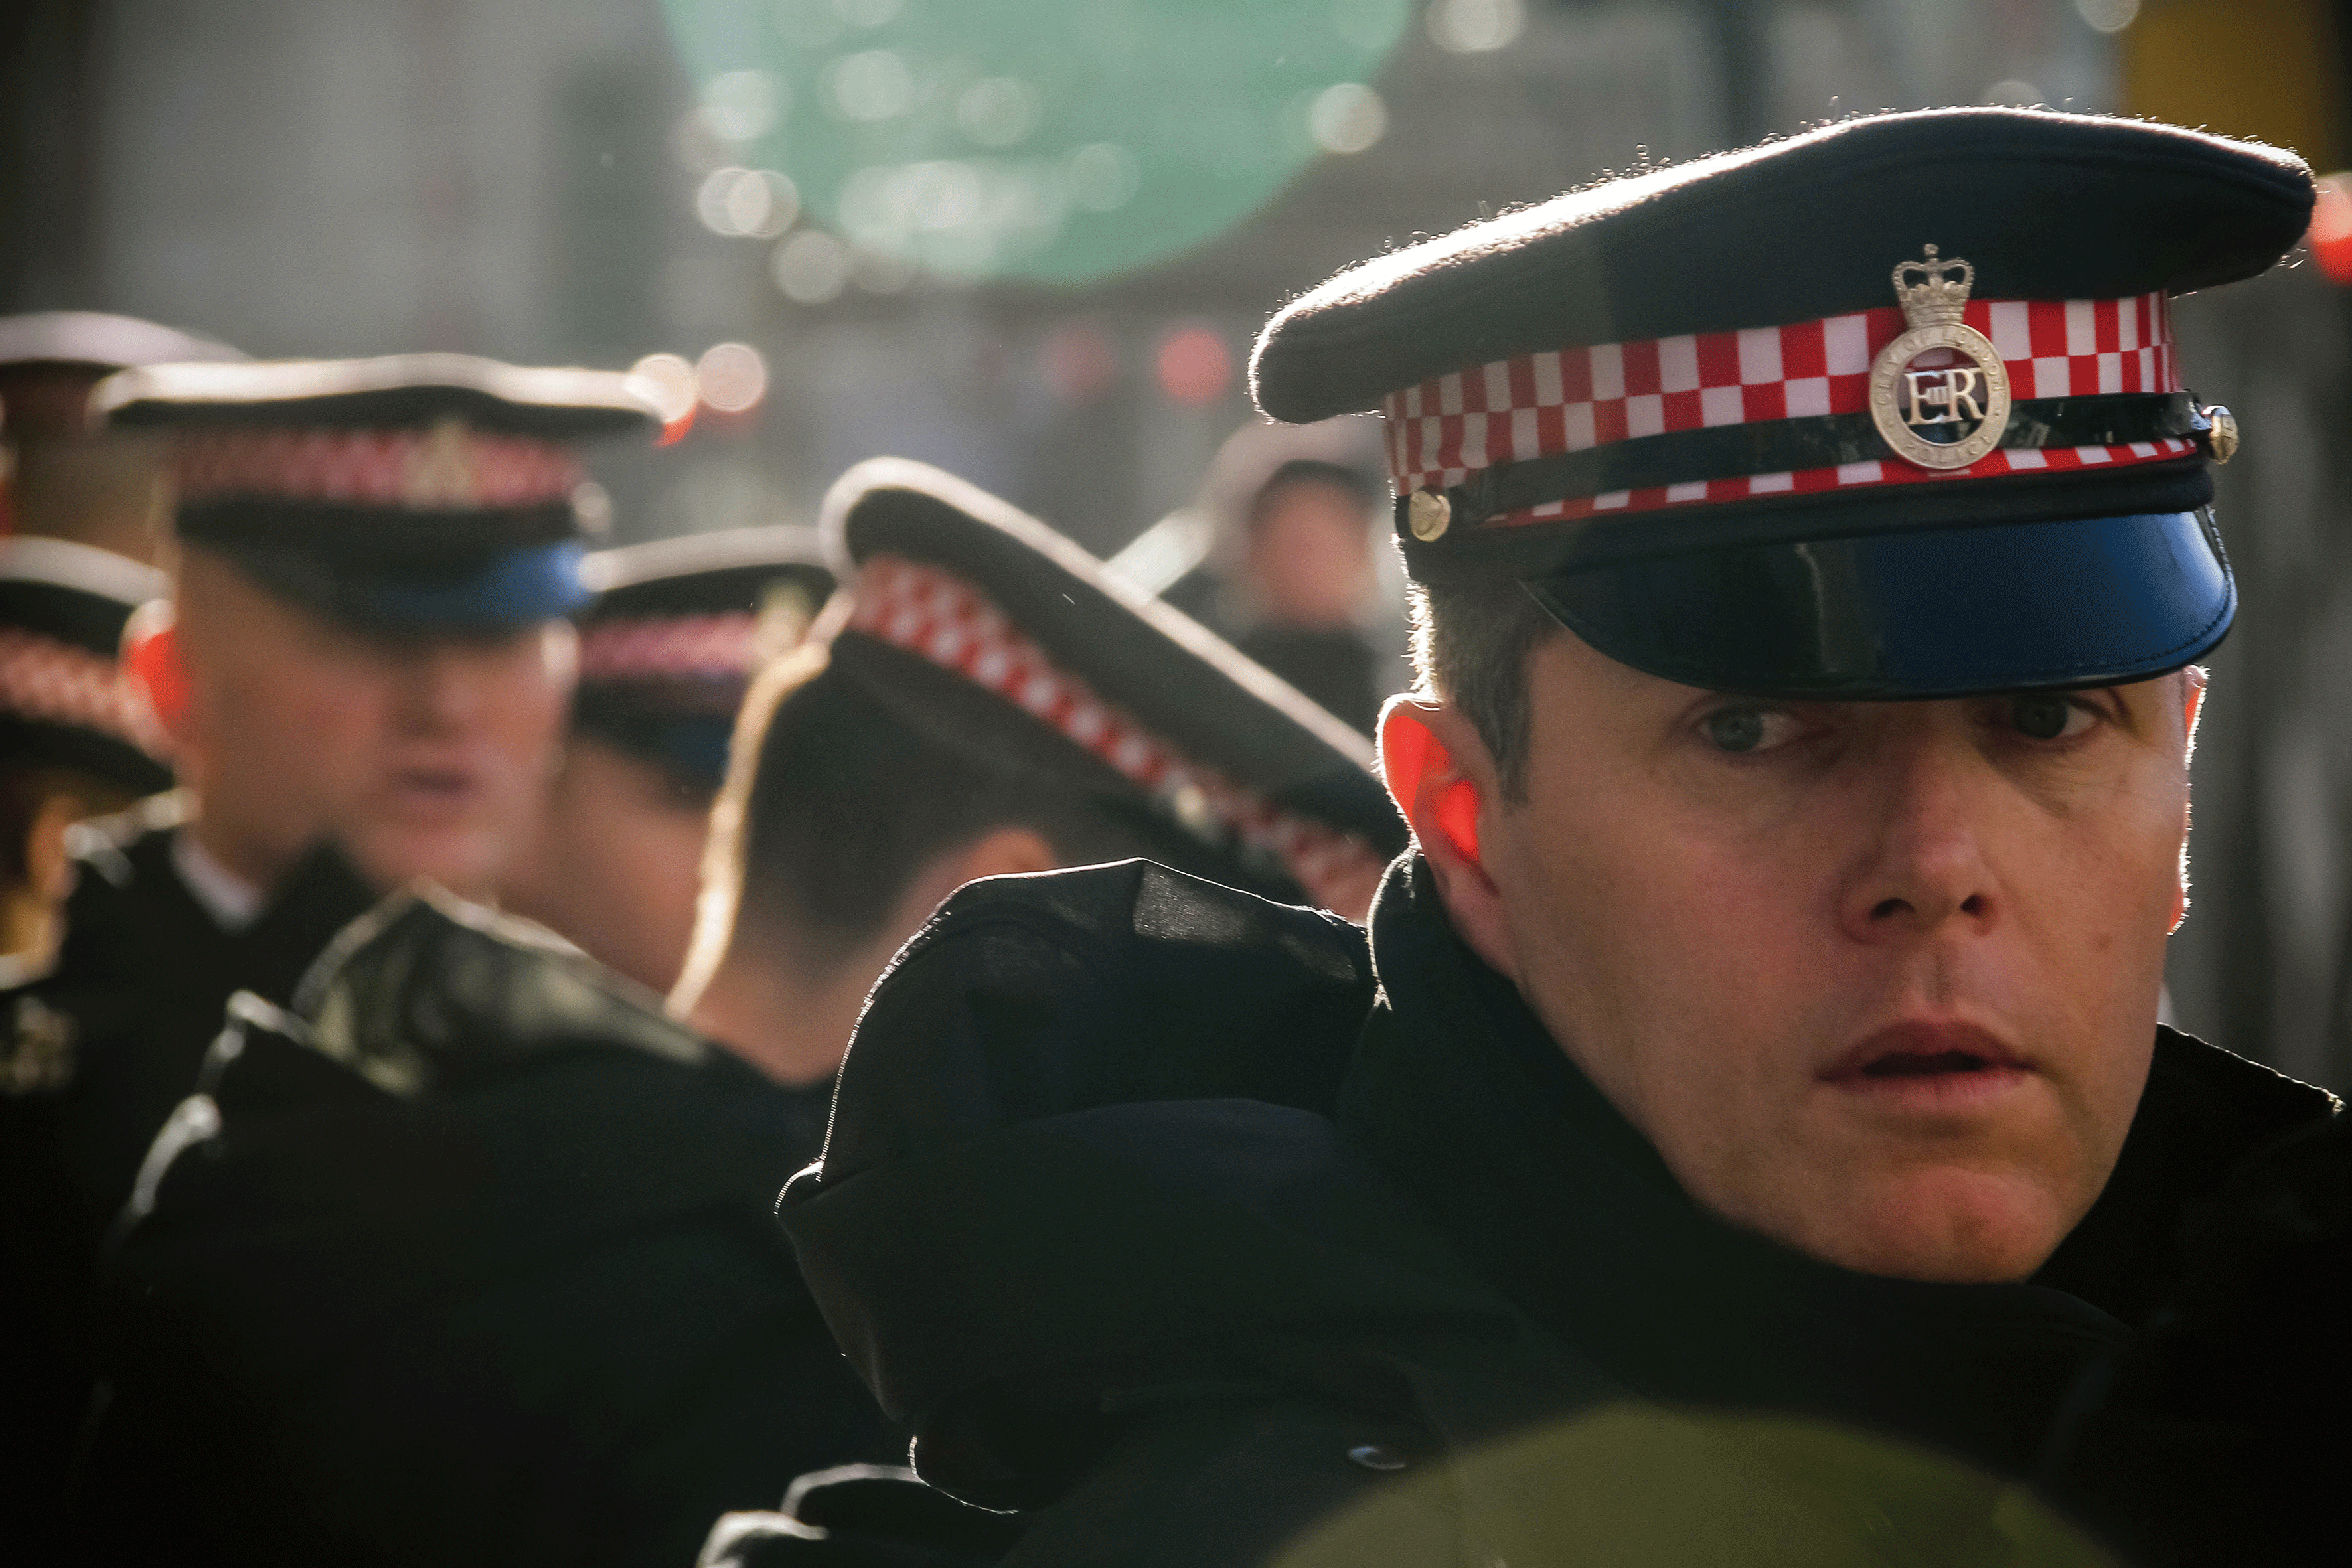 City of london police officers